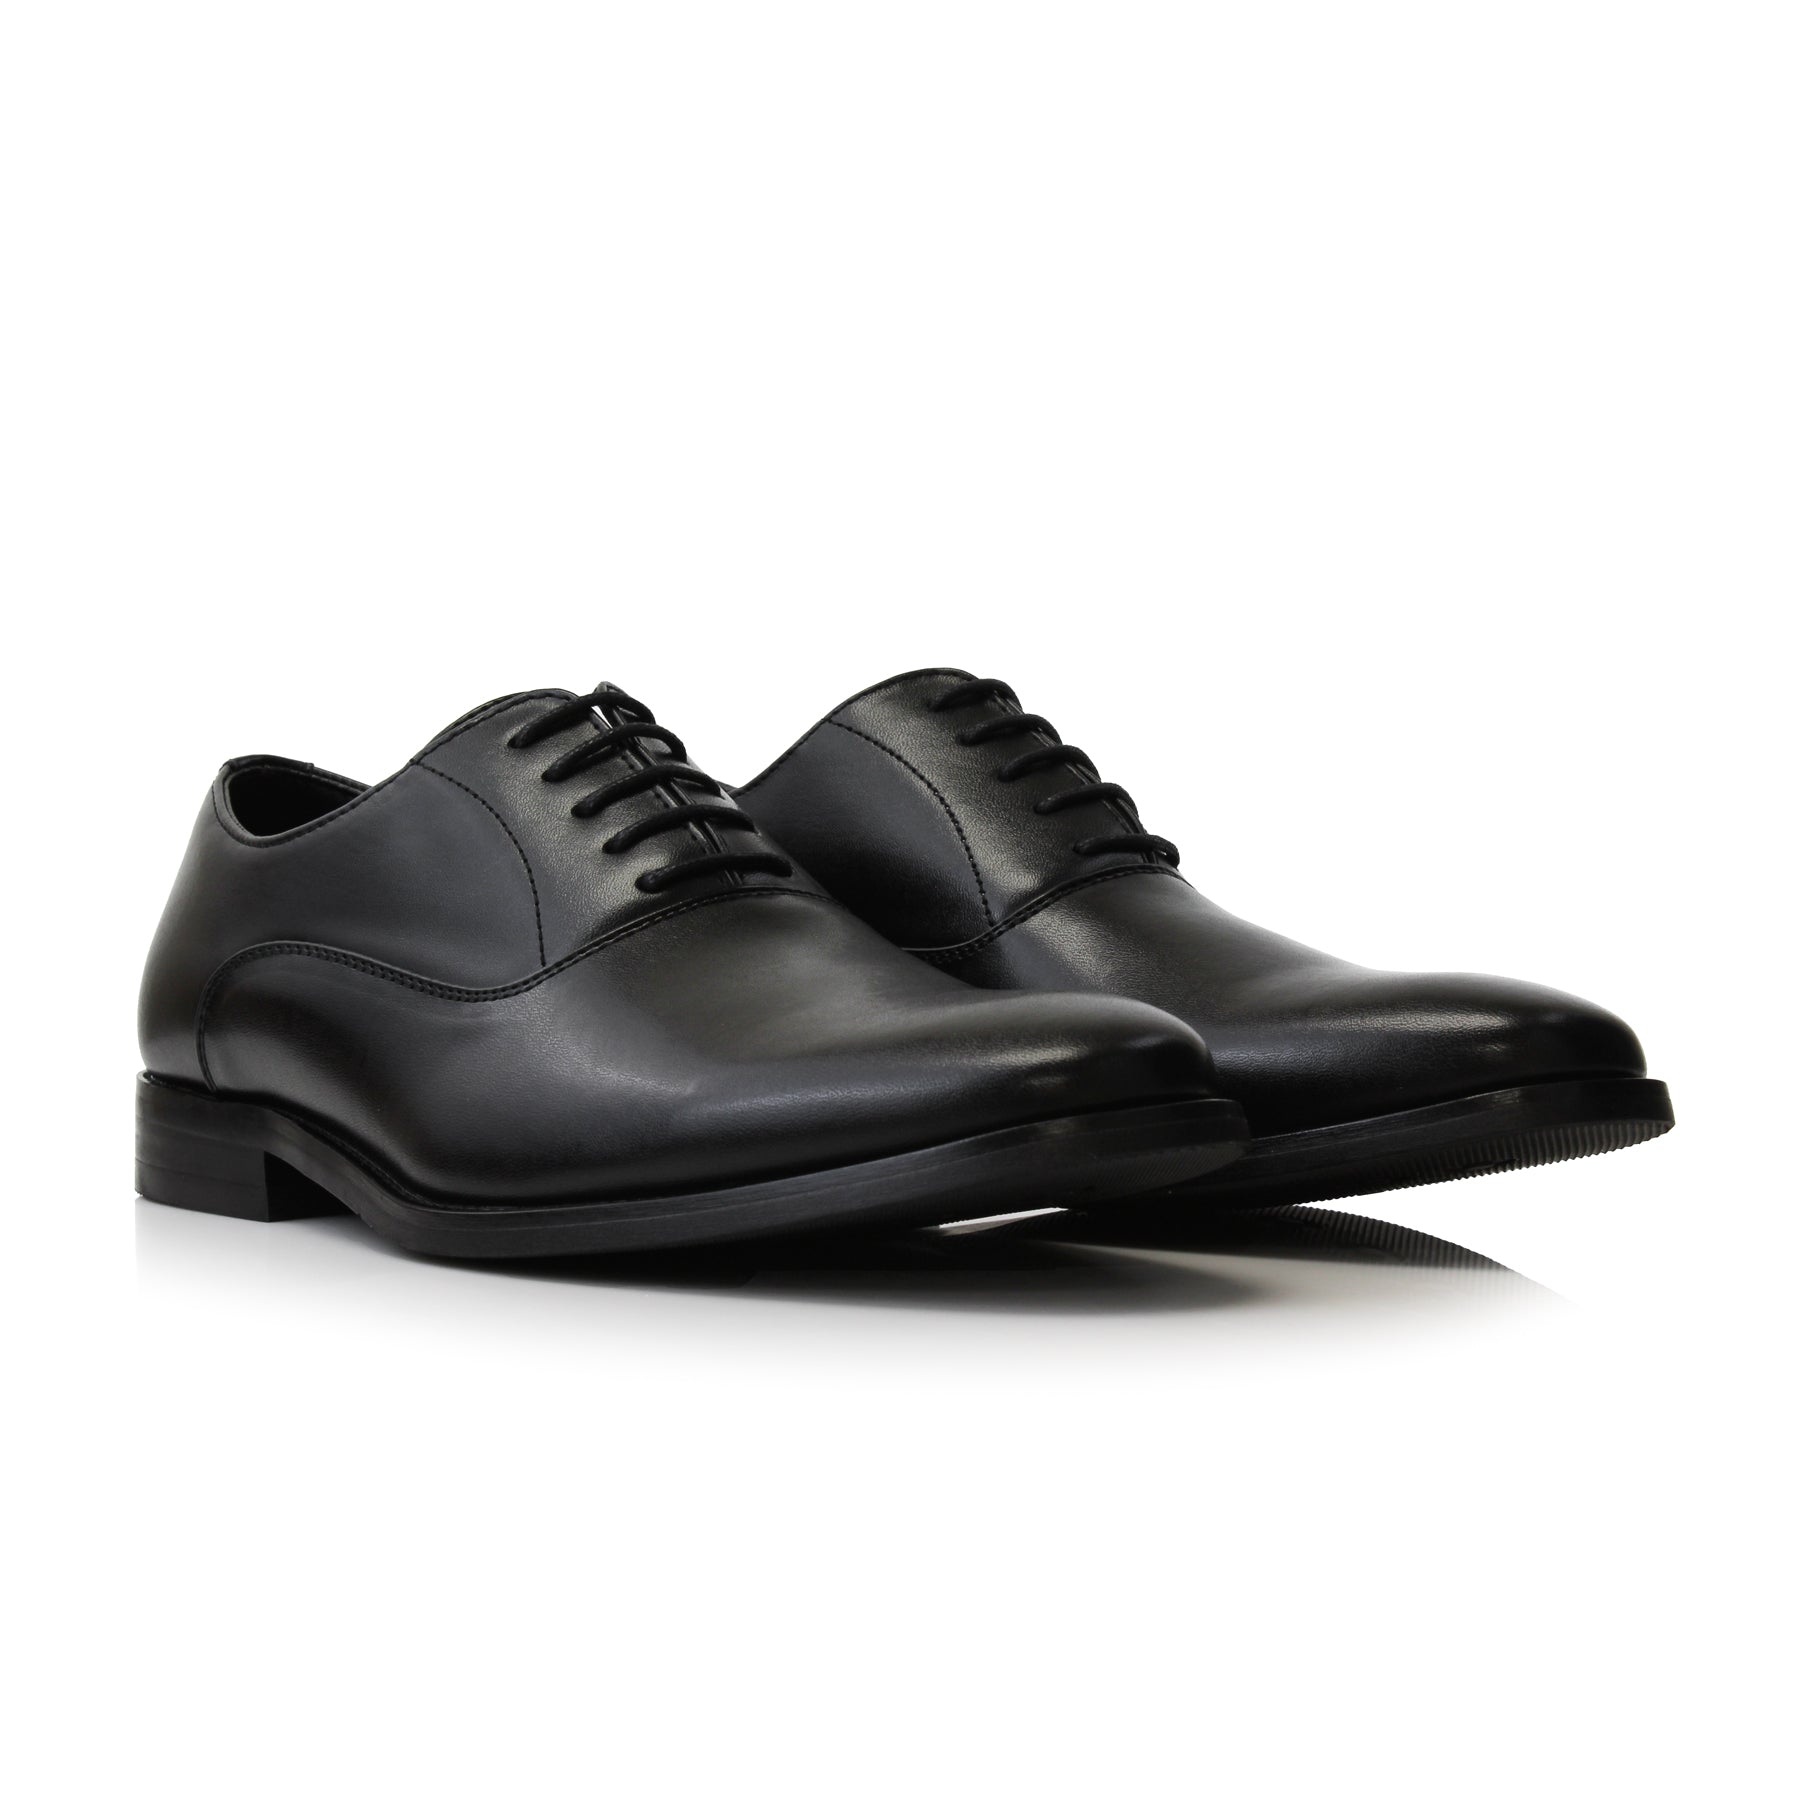 Synthetic Leather Oxfords | George by Ferro Aldo | Conal Footwear | Paired Angle View